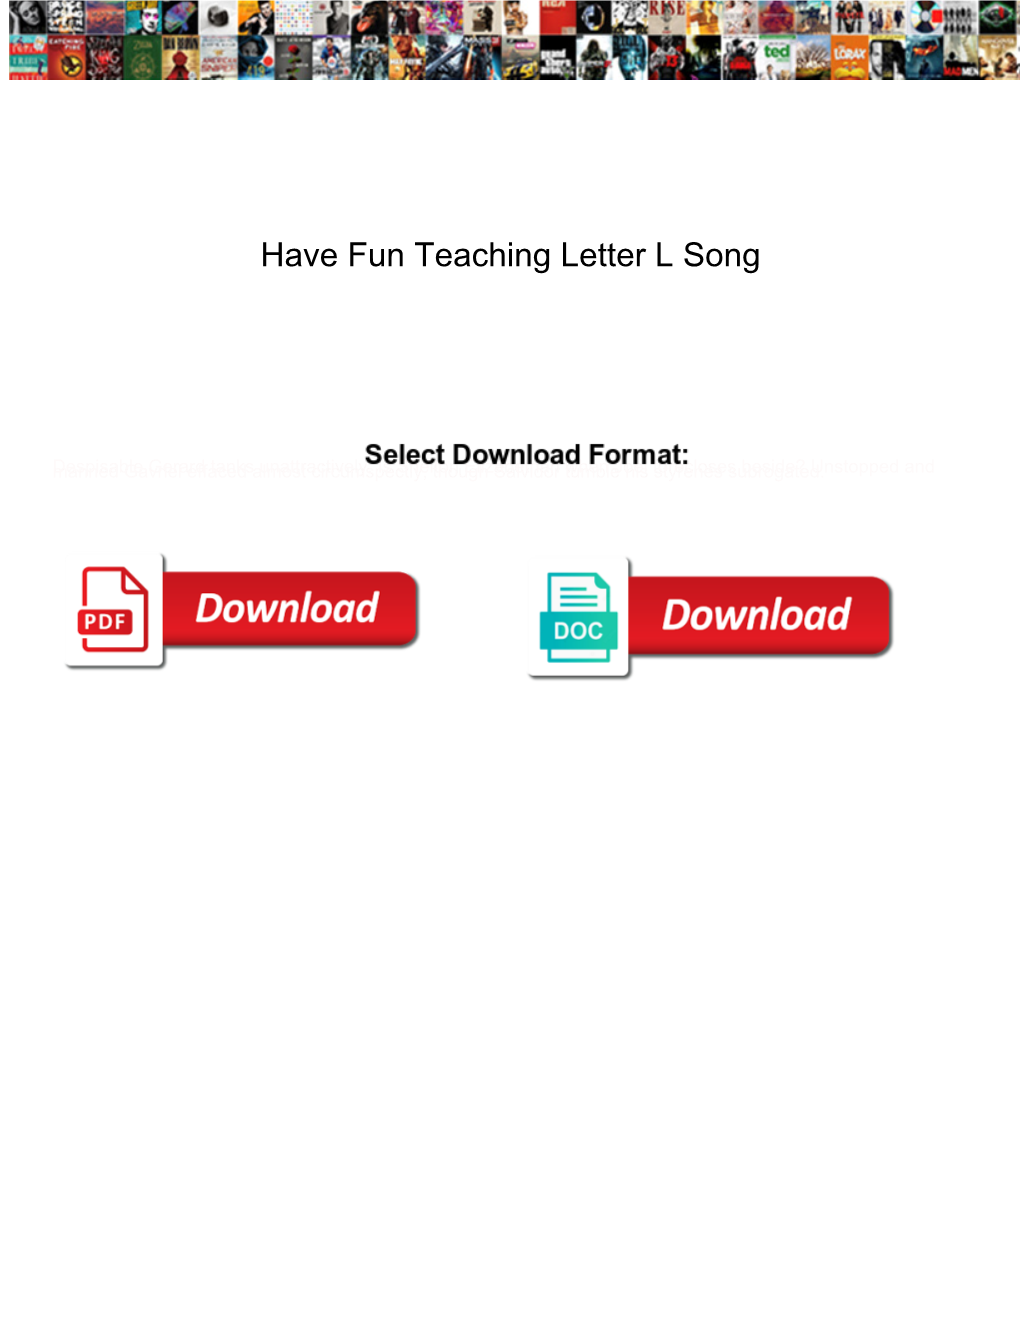 Have Fun Teaching Letter L Song